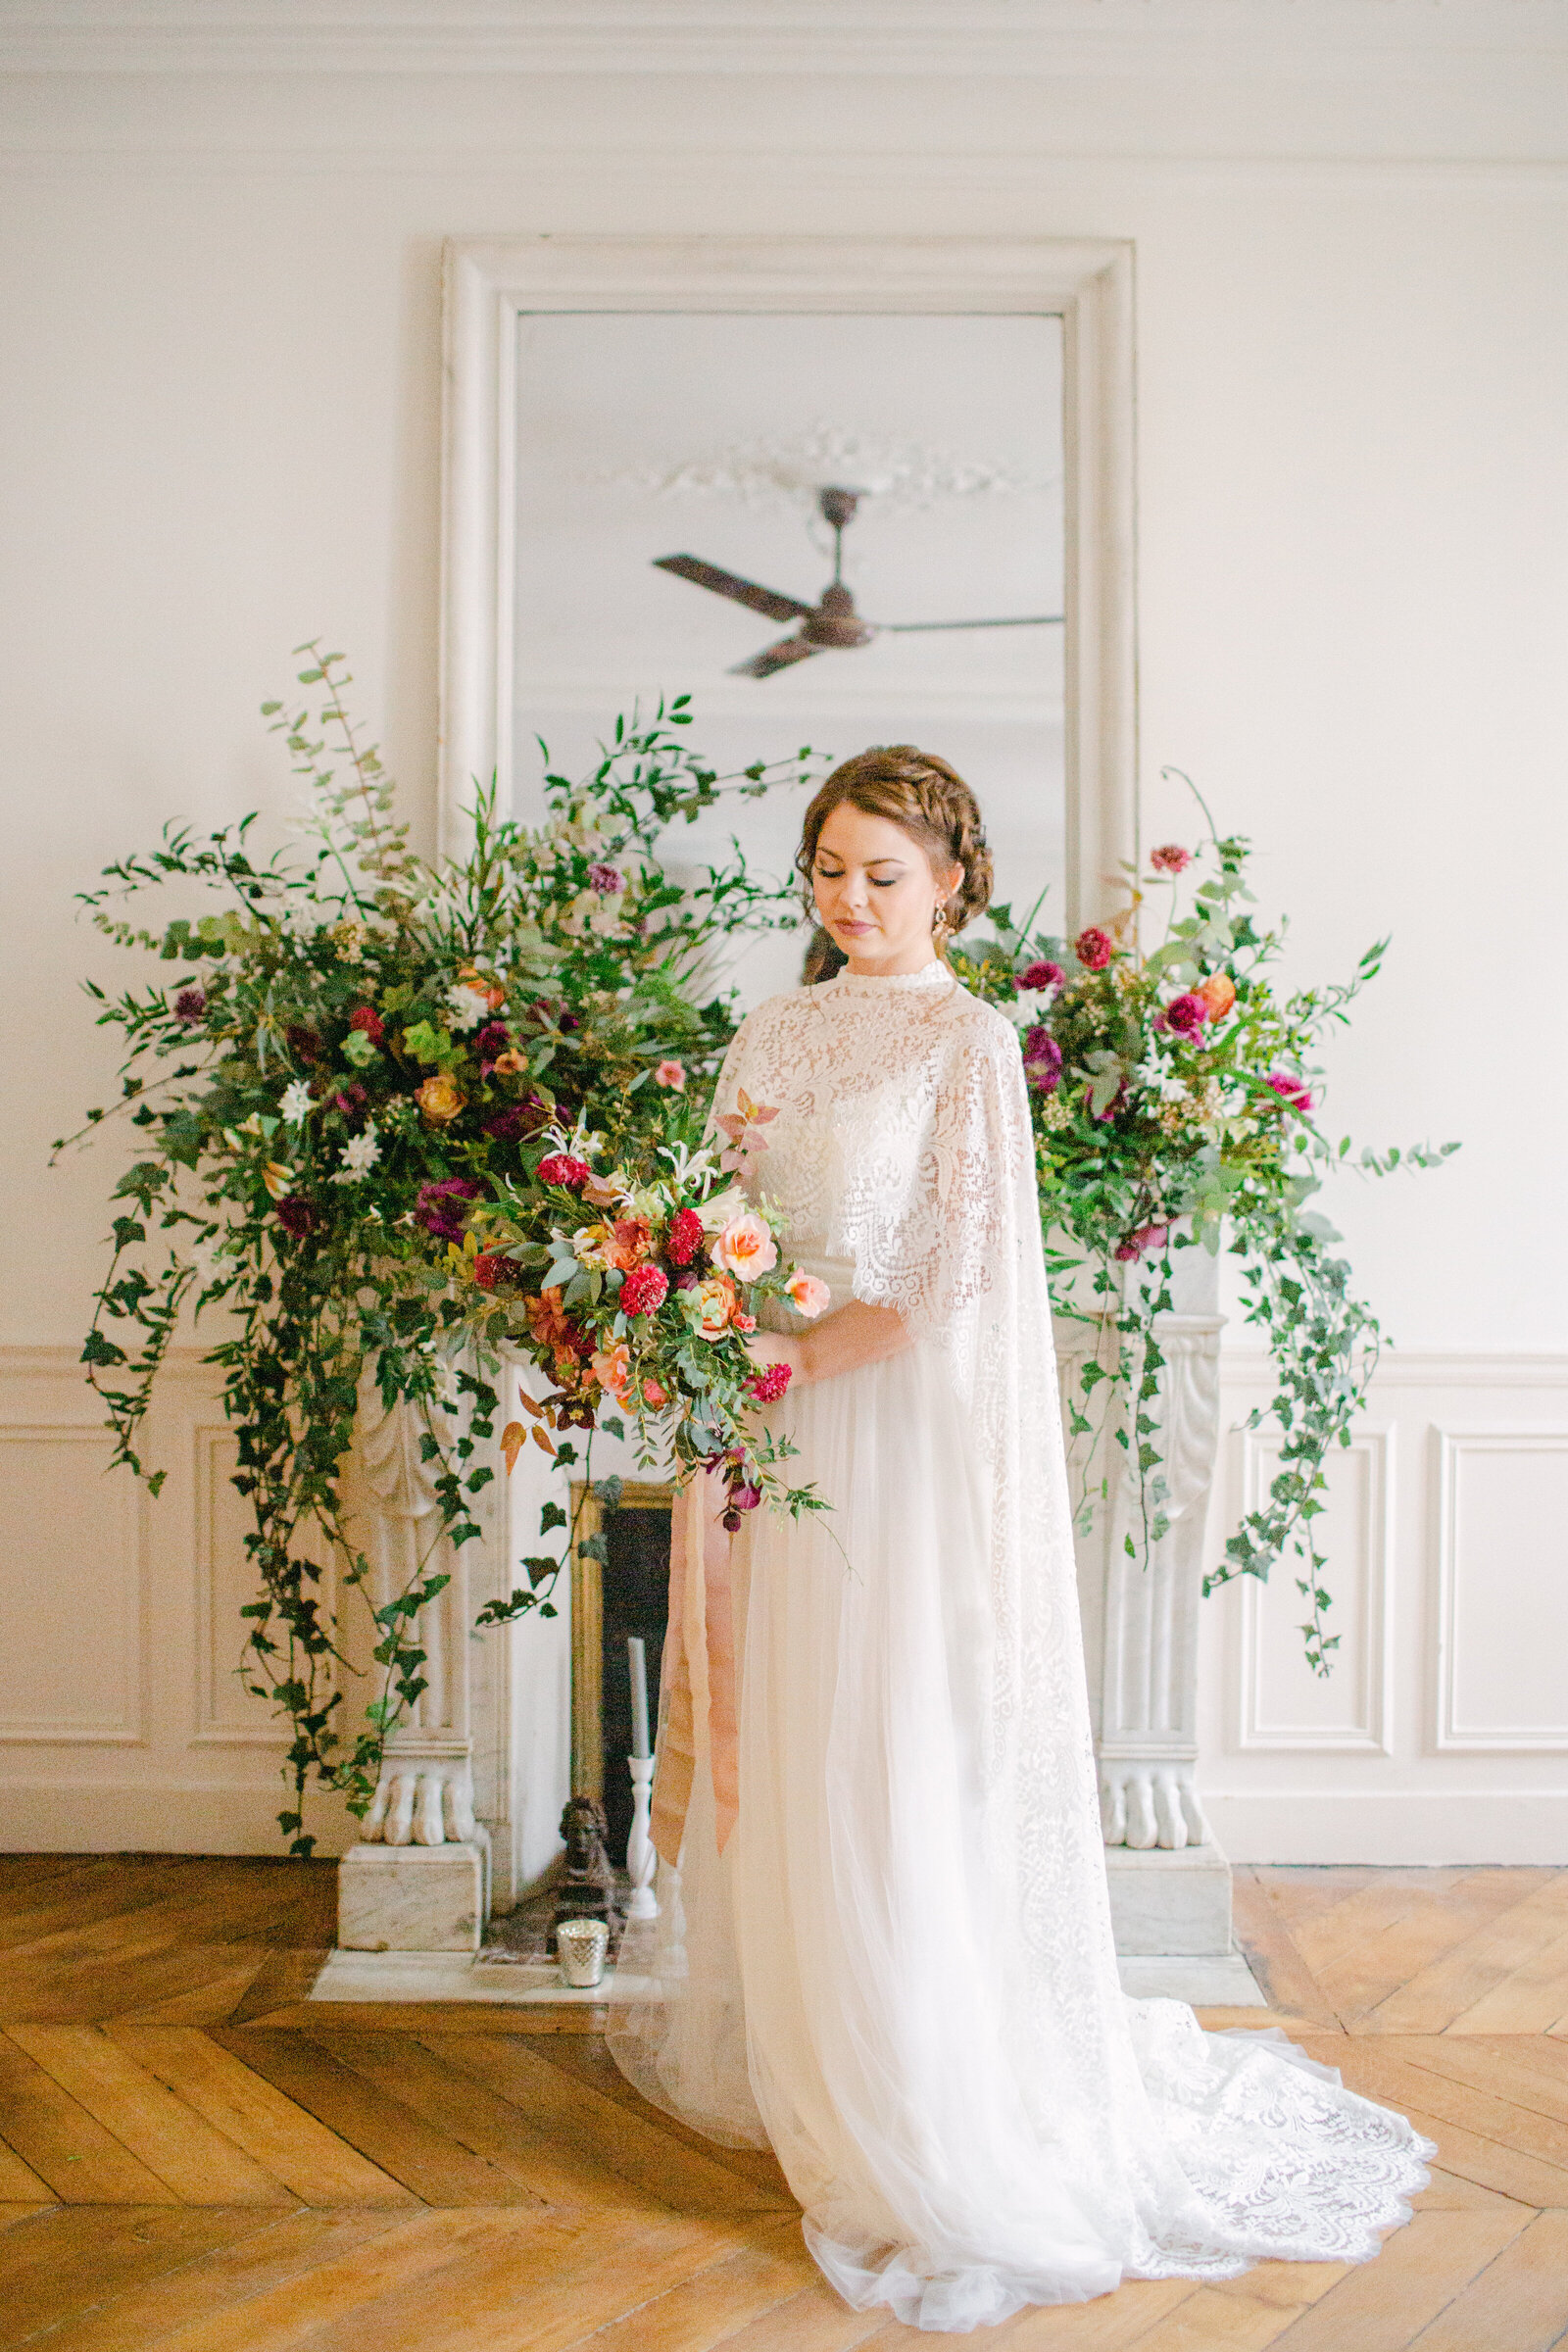 bride holding bouquet and standing in front of fireplace mantel with floral arrangement on it